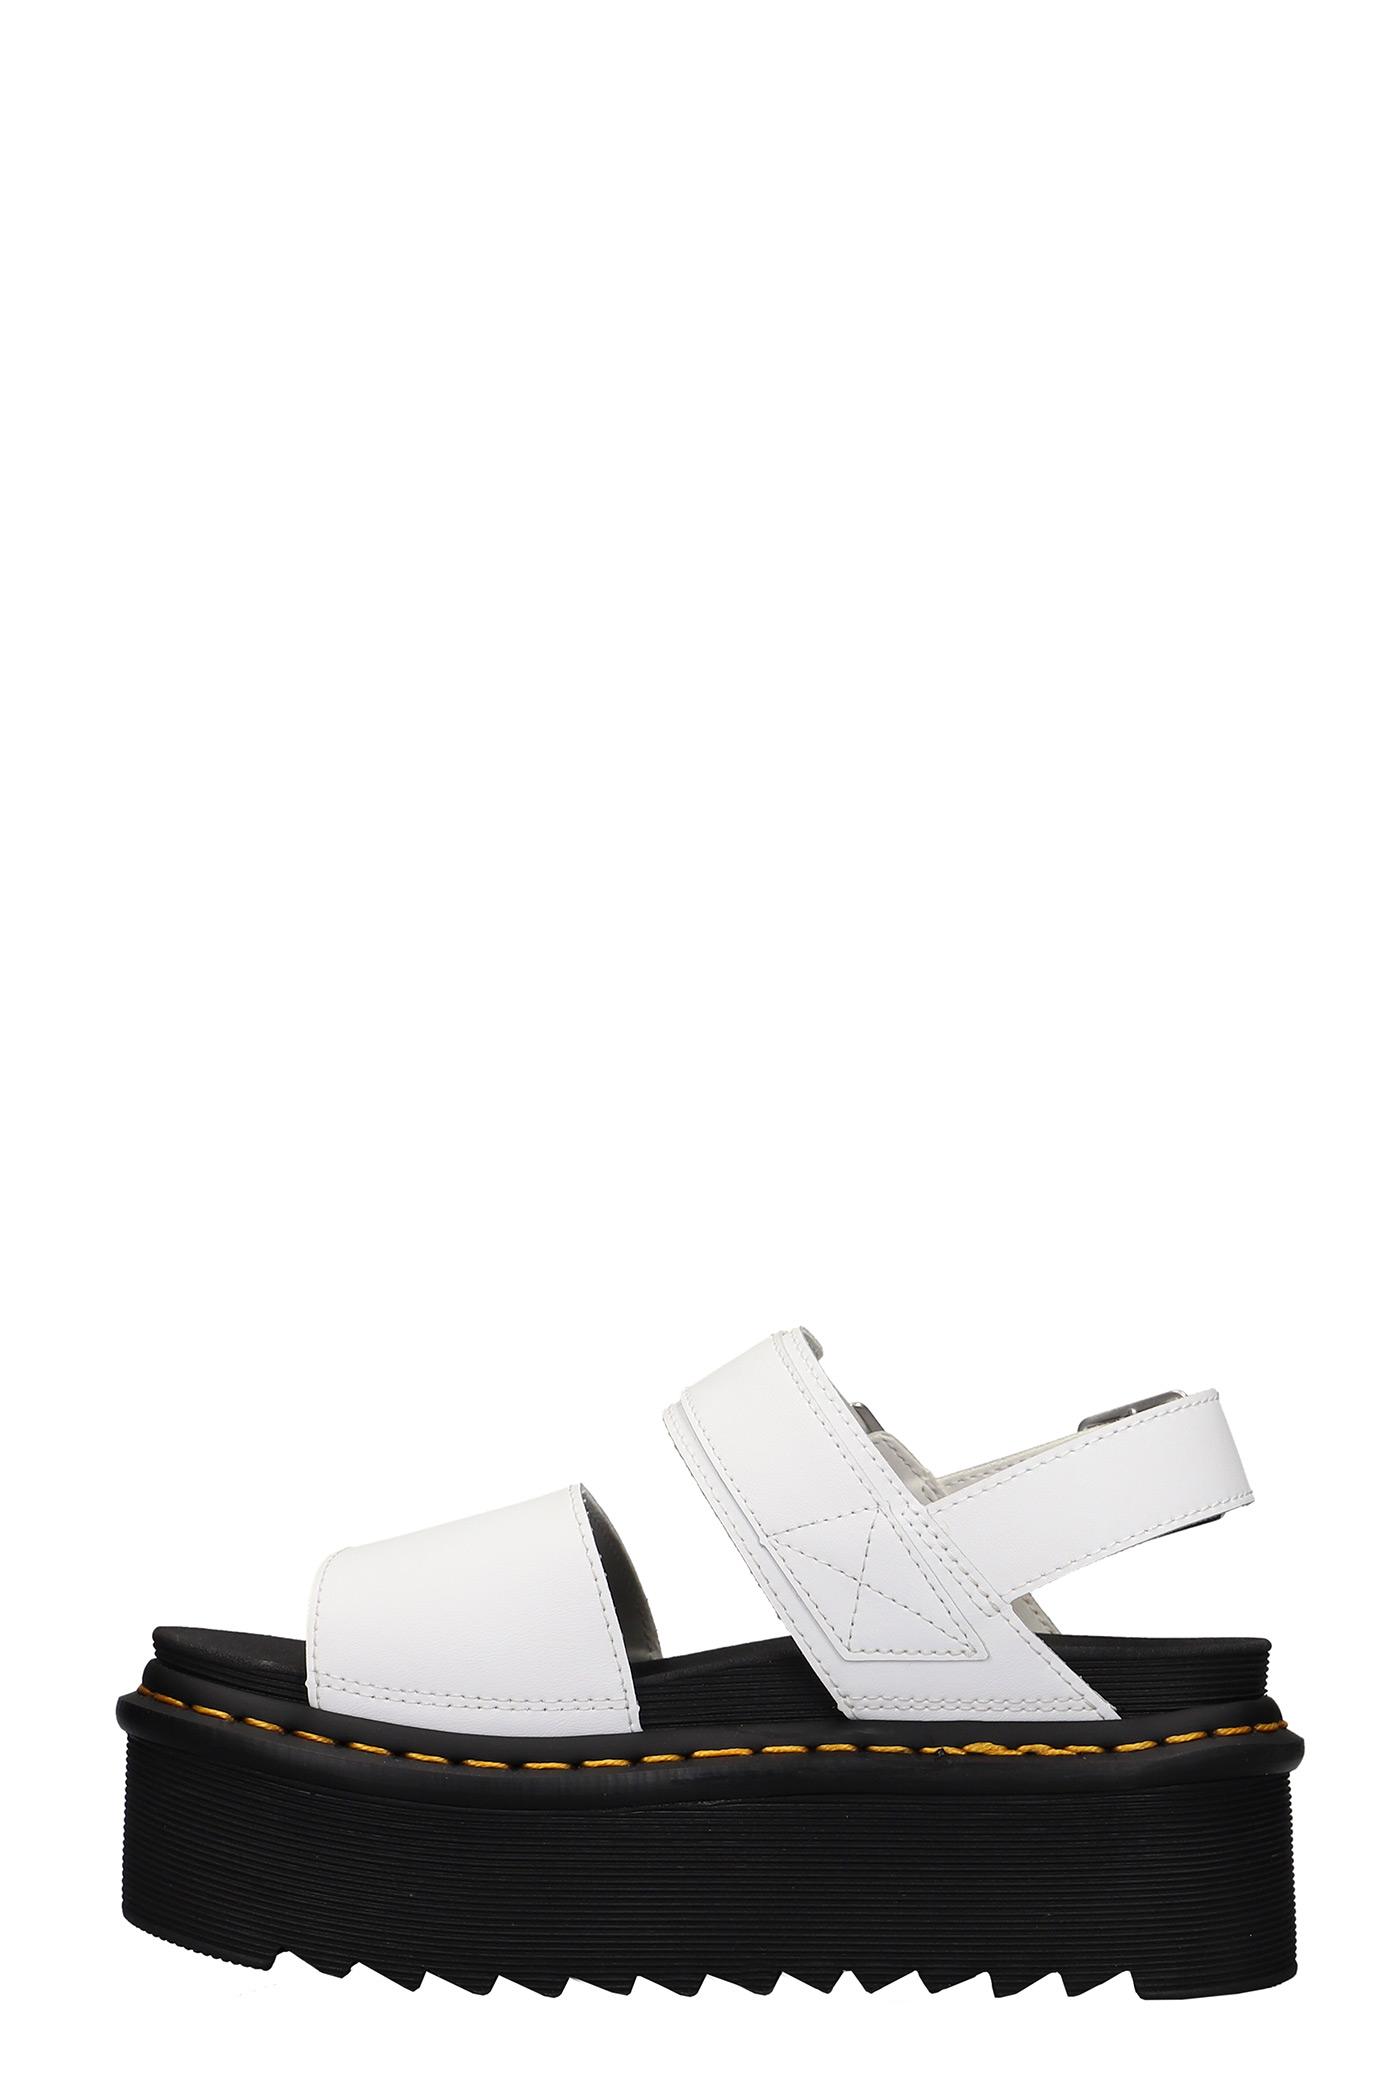 Dr. Martens Voss Quad Sandals In Leather in White - Save 22% | Lyst